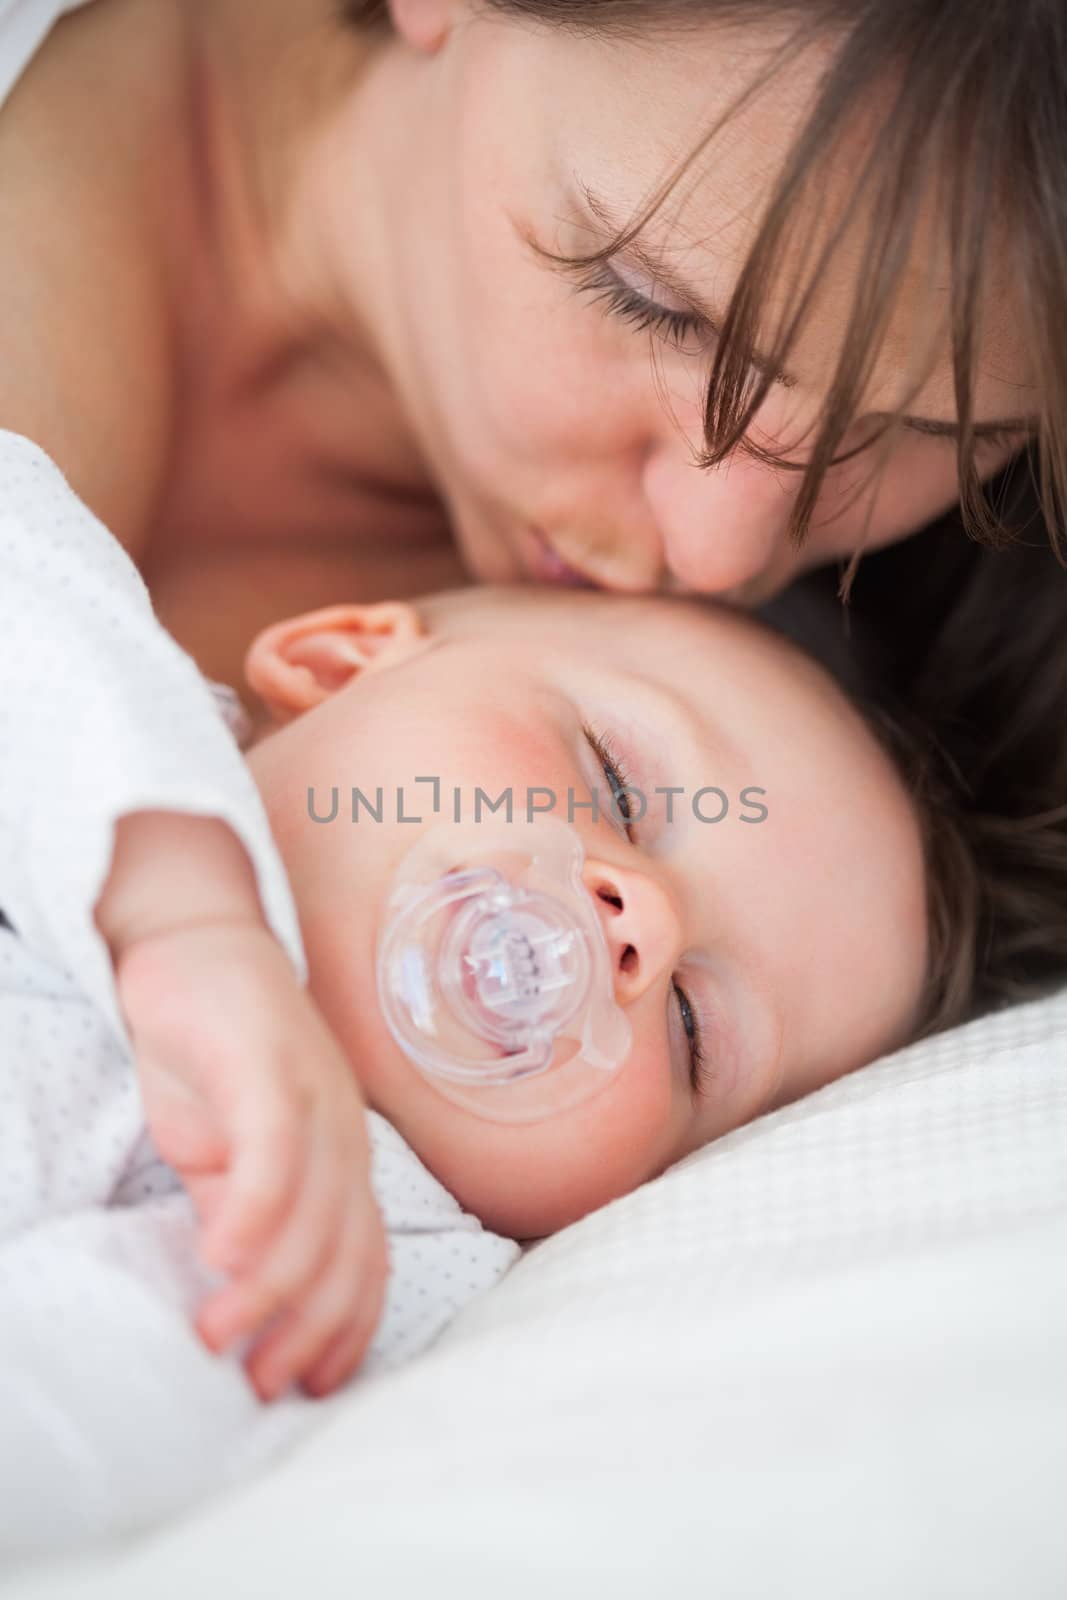 Brunette woman kissing the head of her baby by Wavebreakmedia